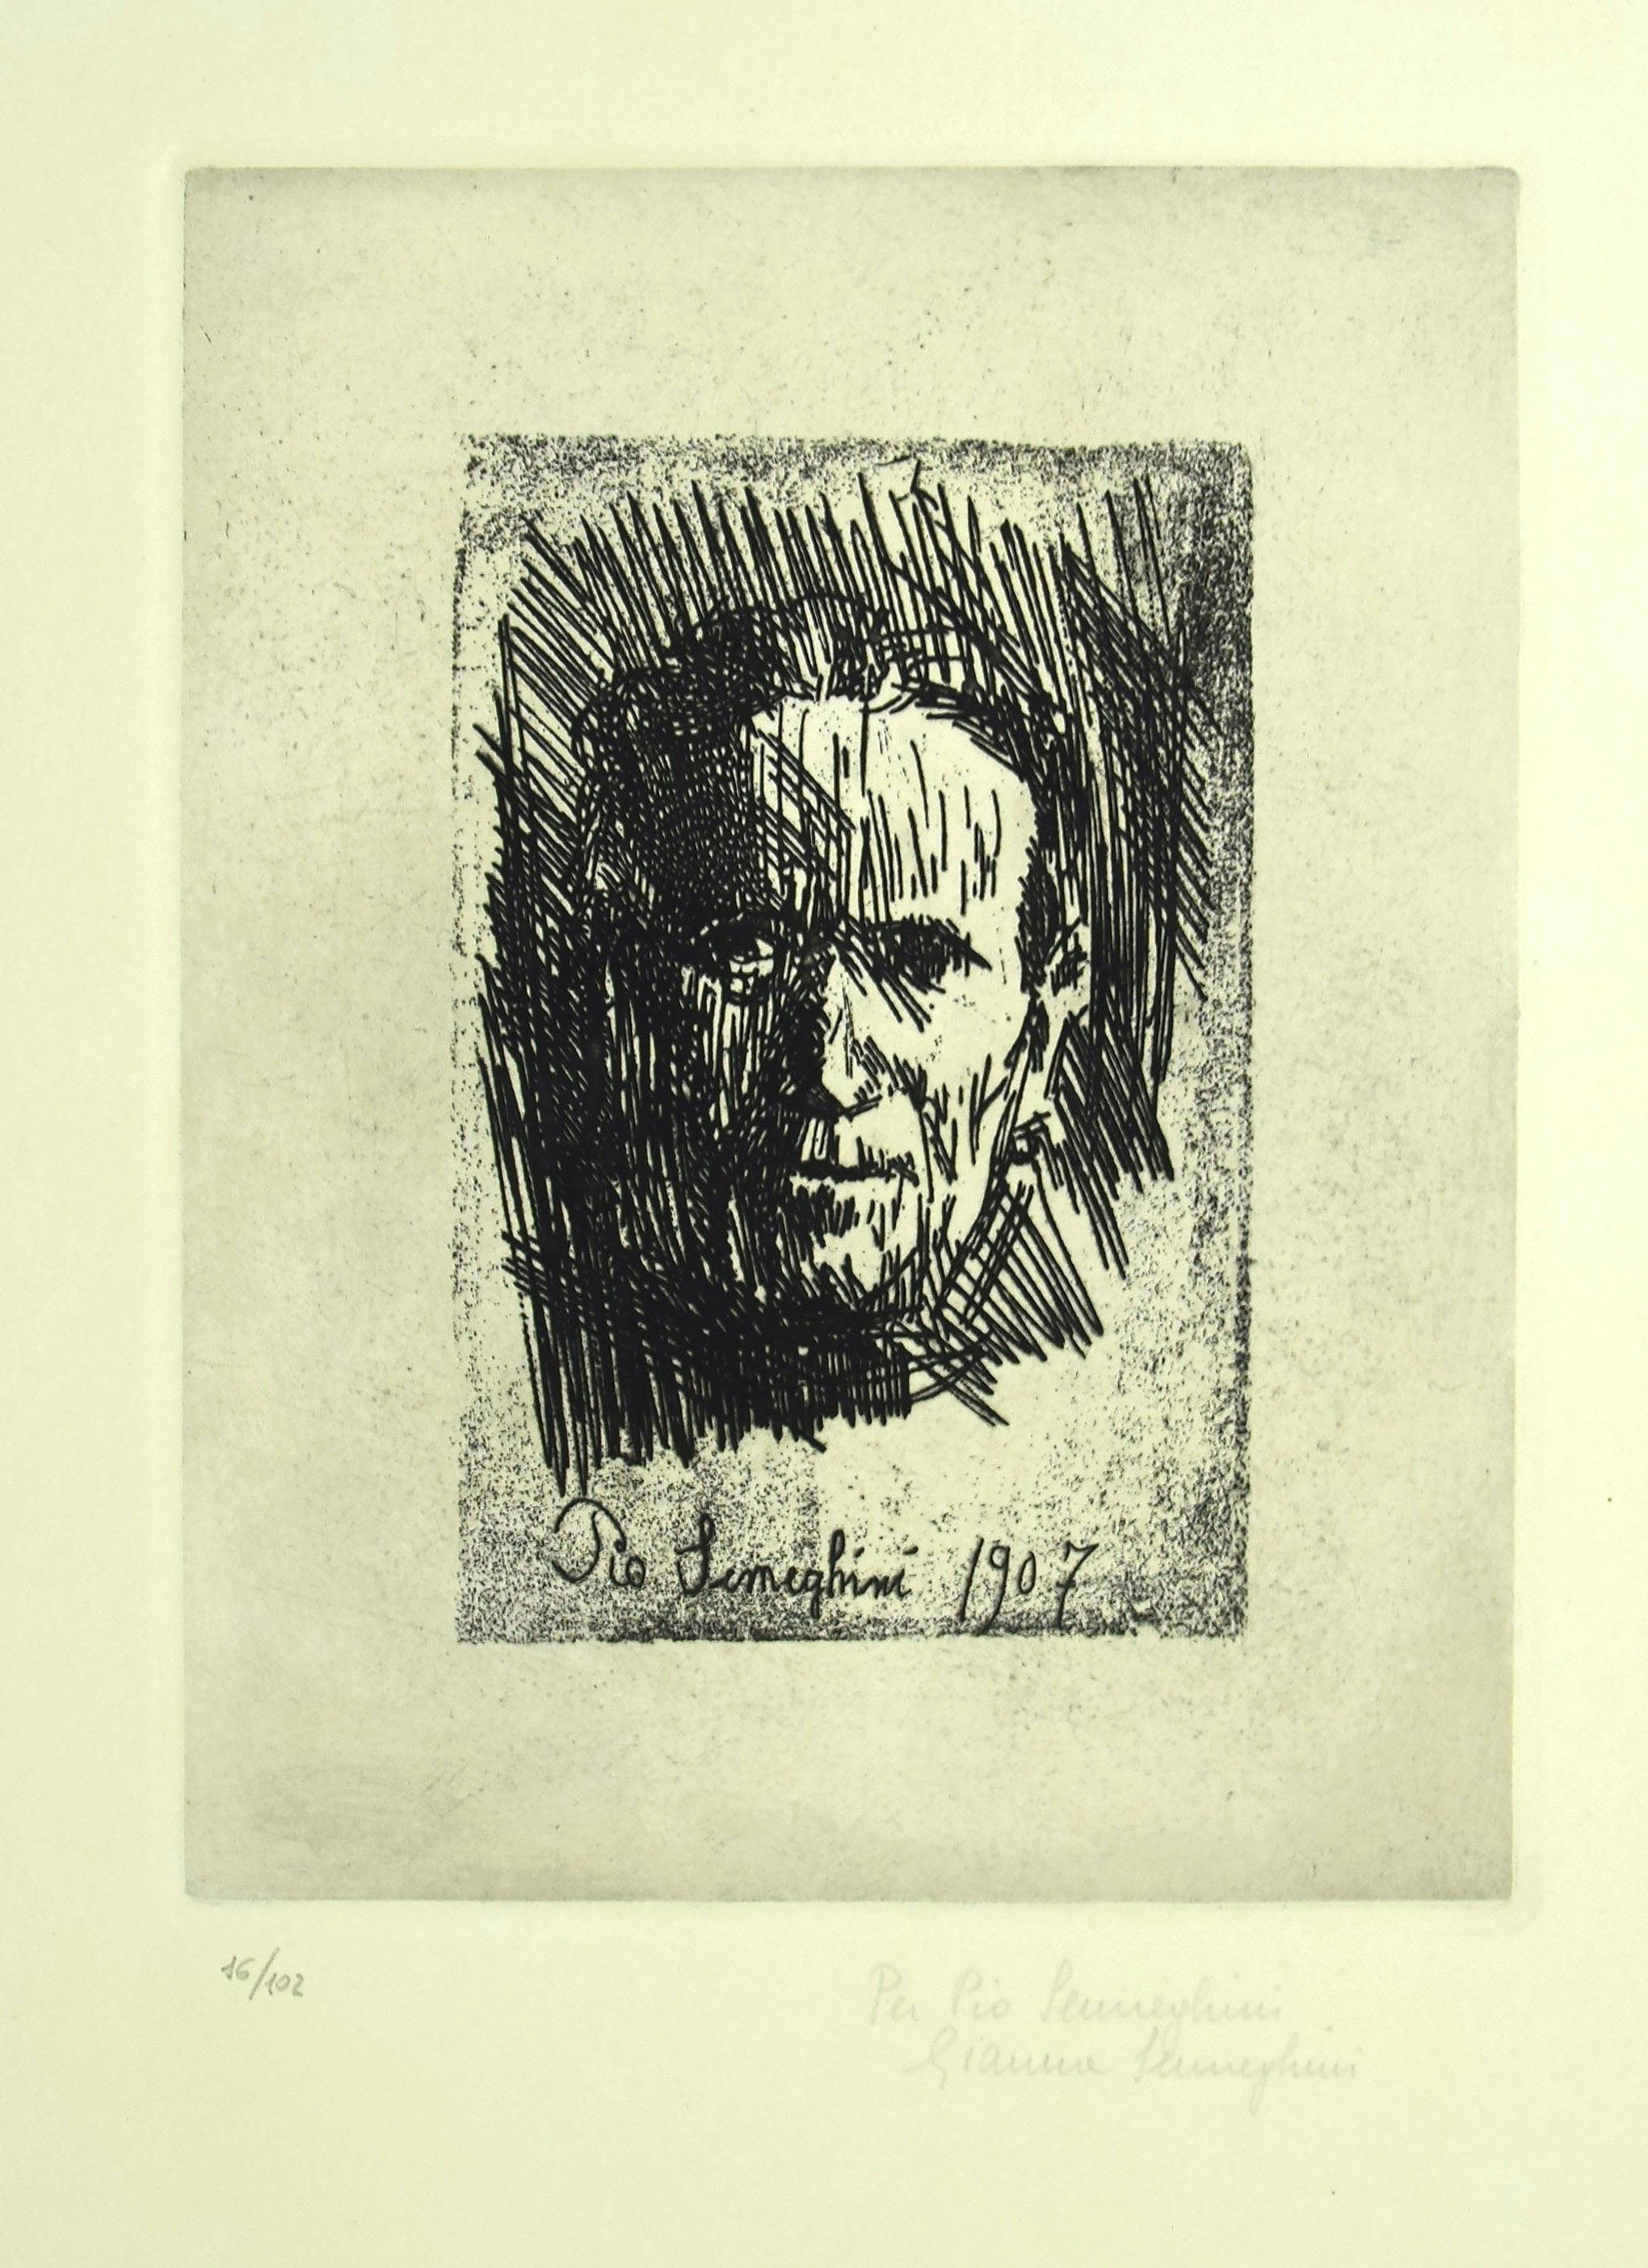 Mother's Portrait is an original black and white etching realized by Pio Semeghini in 1964.

Hand written dedication on the right margin: "Per Pio Semeghini, Gianna Semeghini"

Numbered on the lower left.

Edition of 102 copies (16/102), etching on